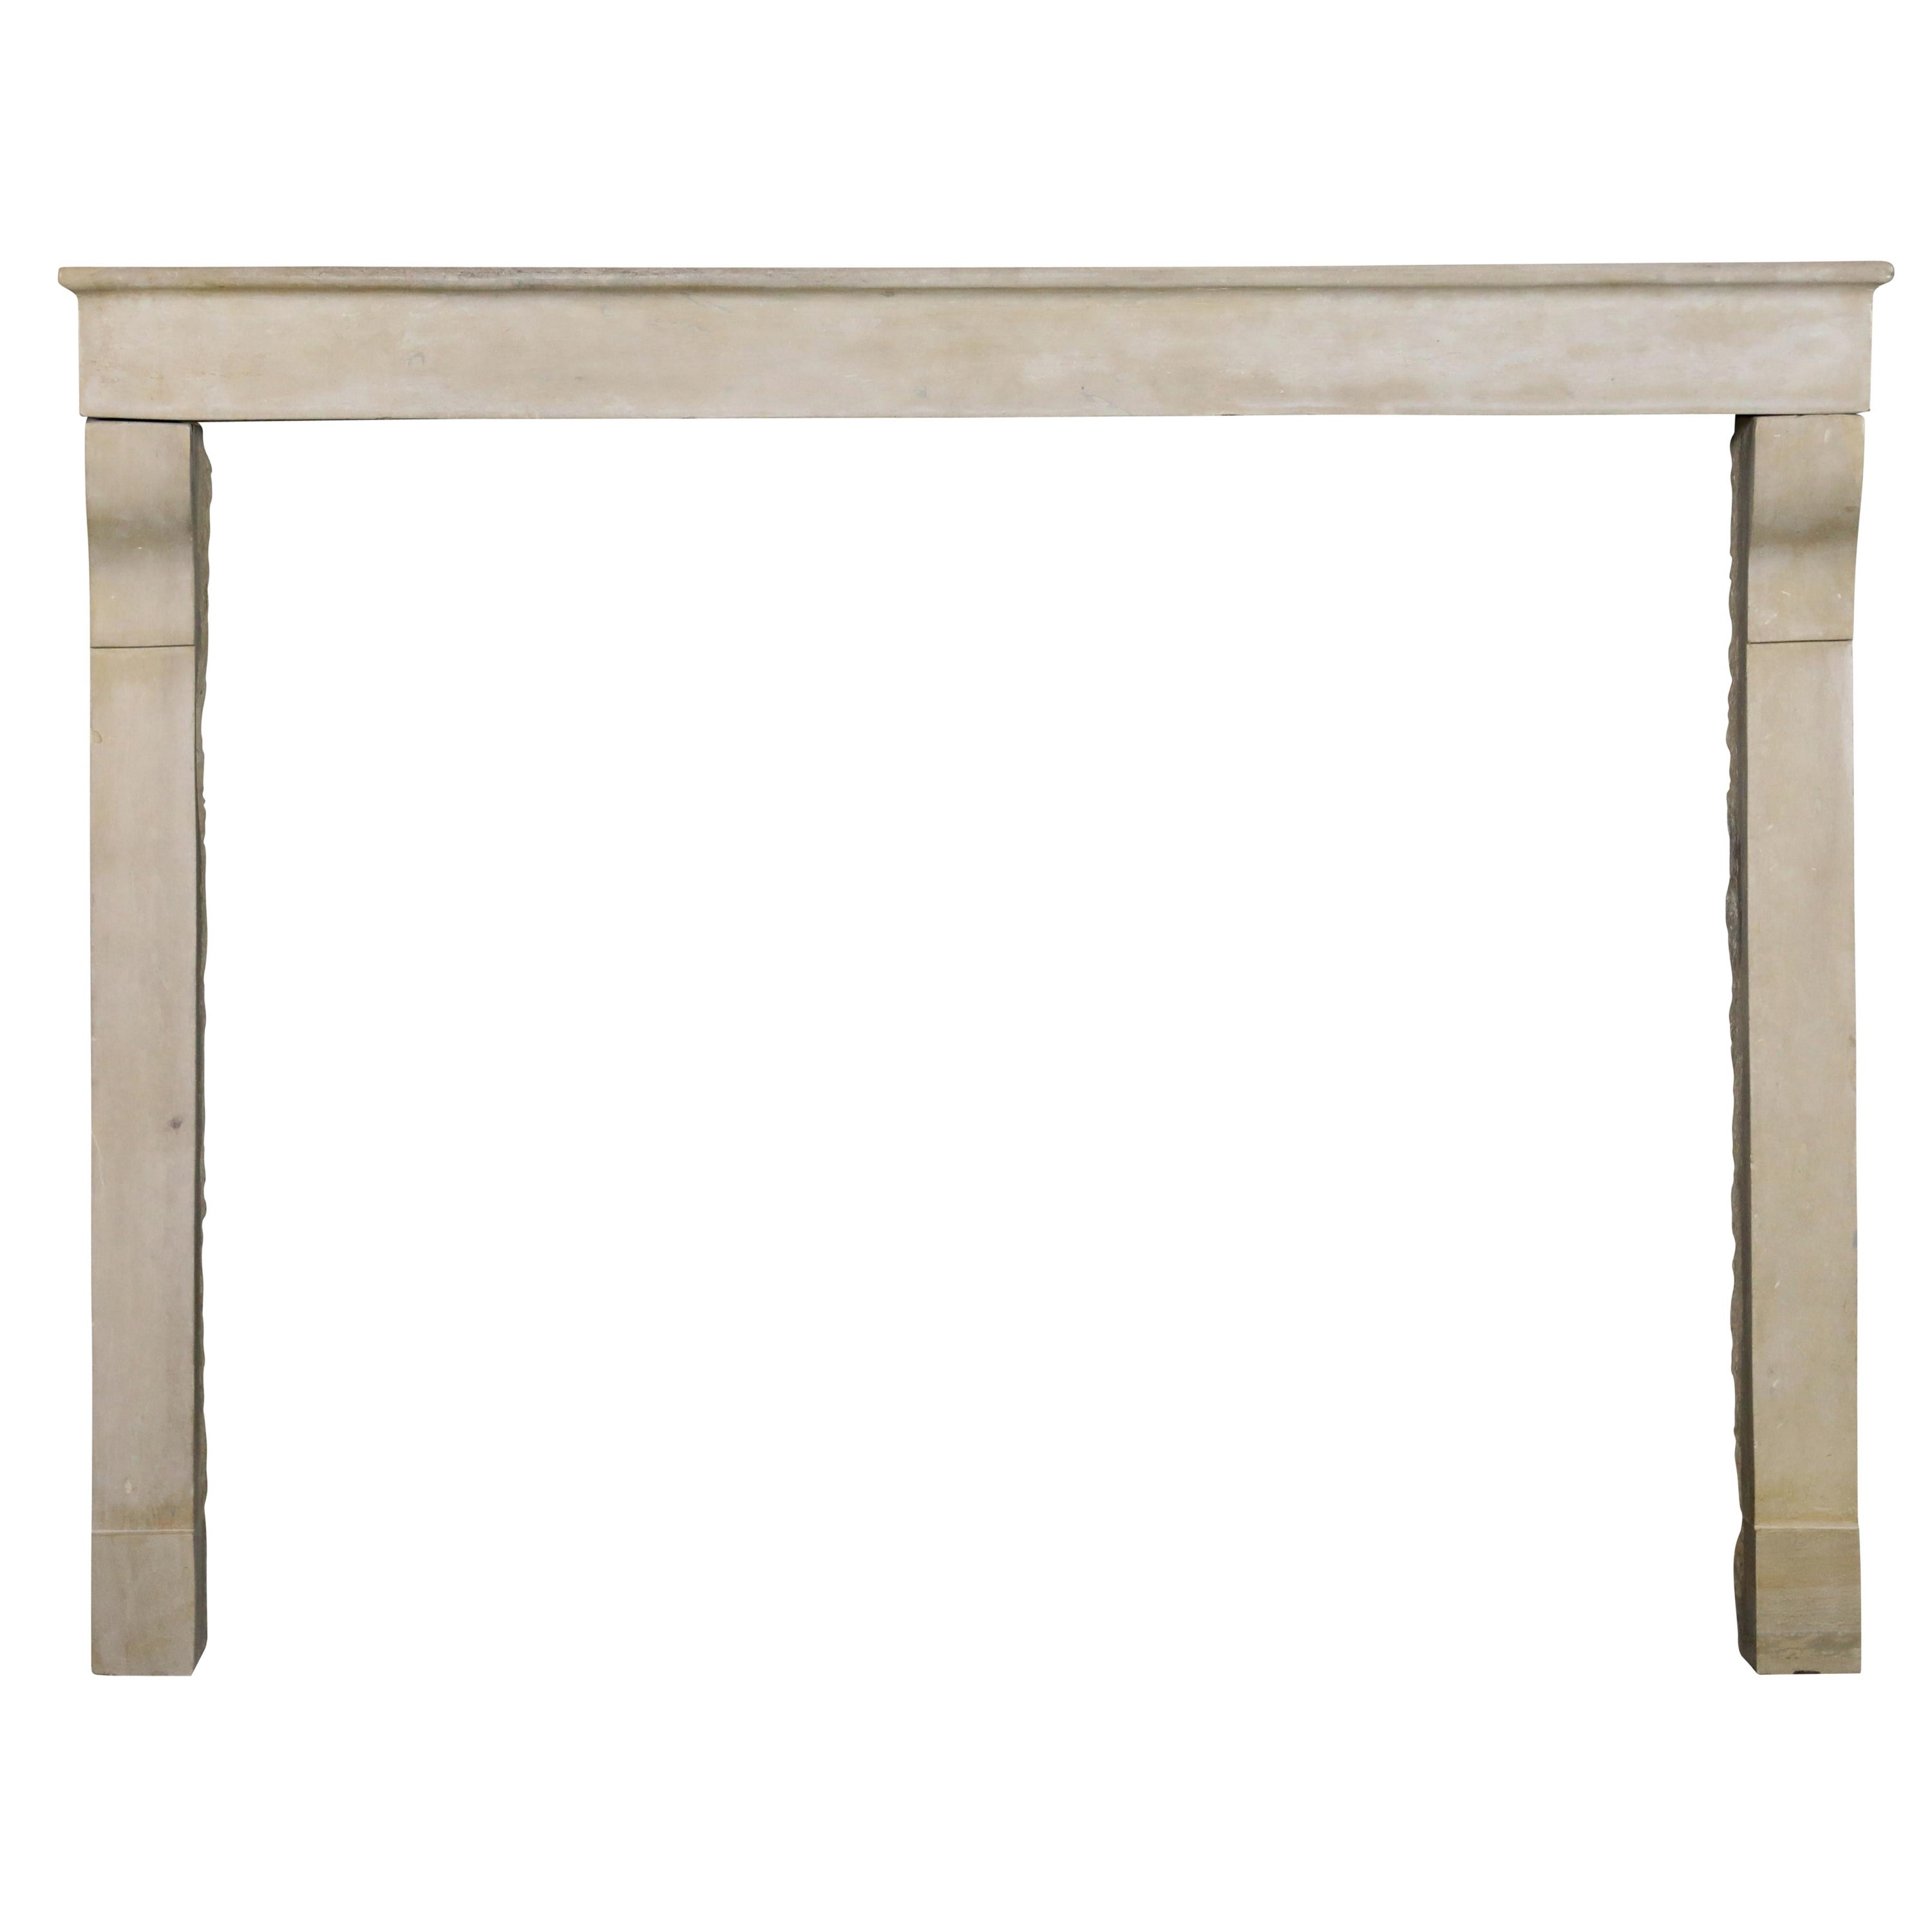 Decorative Antique French Fireplace in Timeless Beige Limestone For Sale